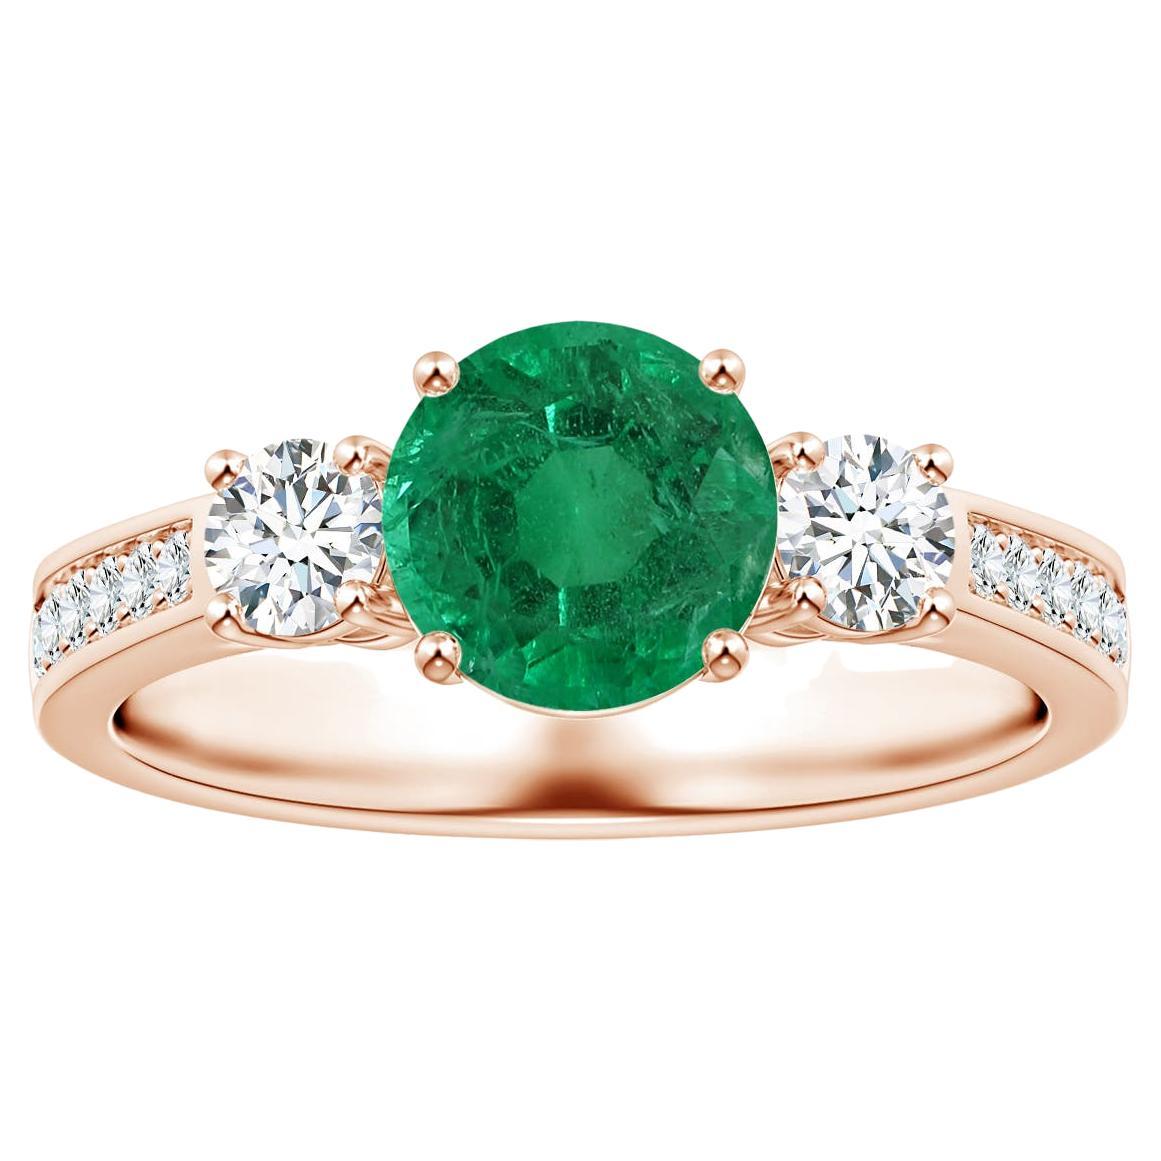 ANGARA 3-Stone GIA Certified Natural Emerald Ring in Rose Gold with Diamonds